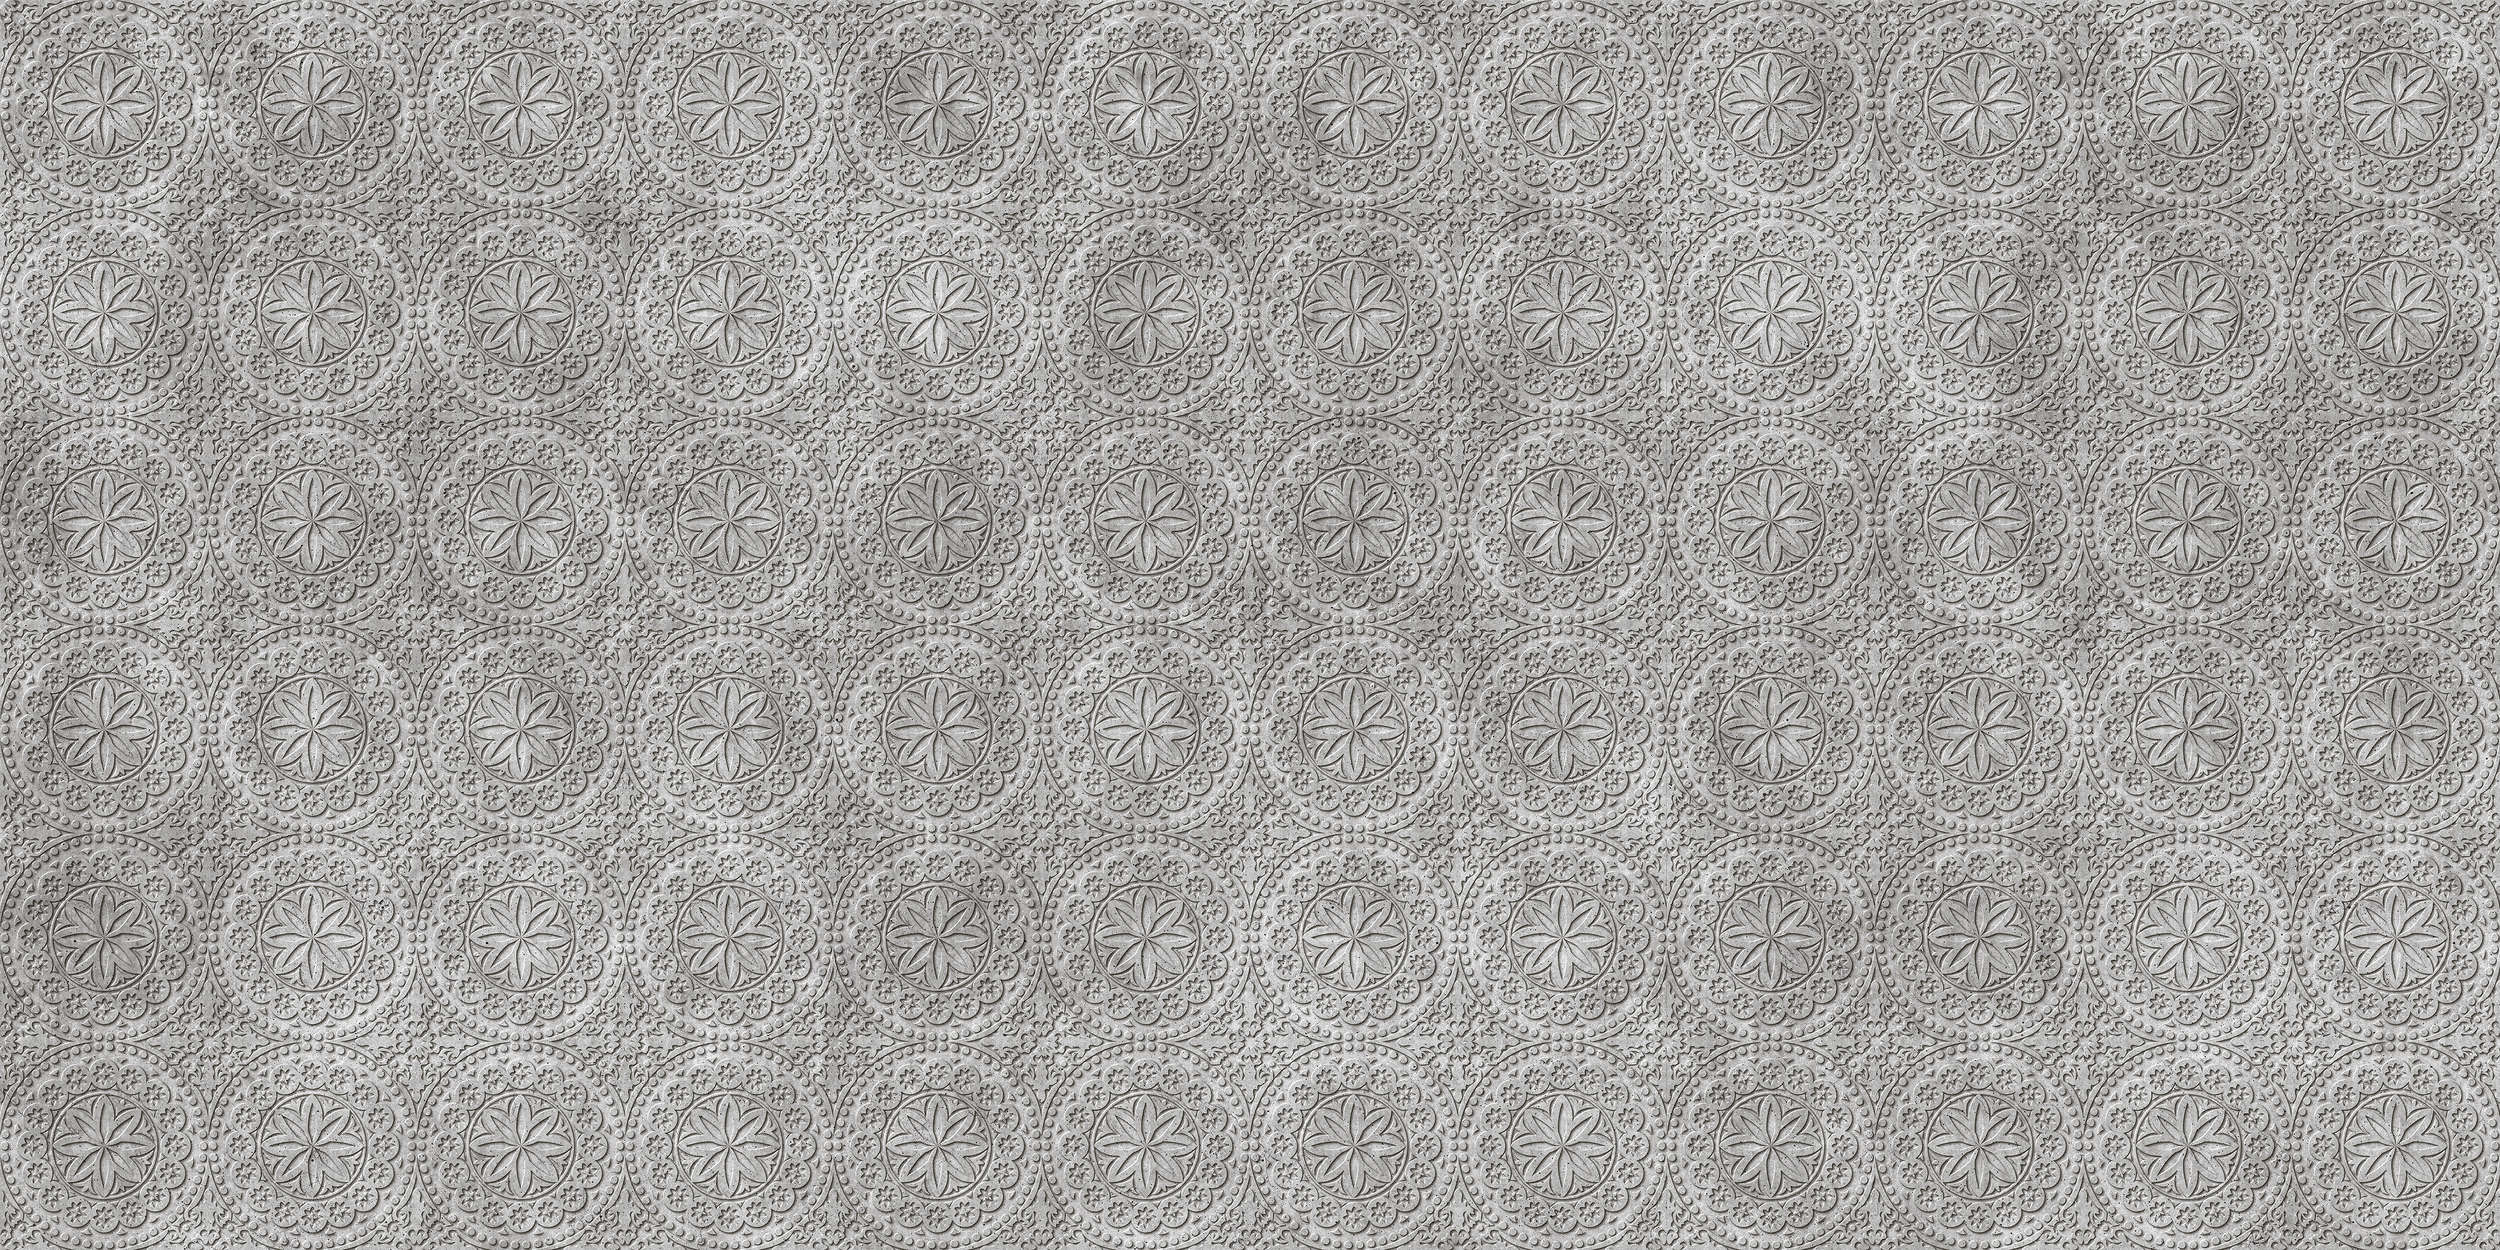             Tile 2 - Cool 3D Concrete Flowers Digital Print - Grey, Black | Pearl Smooth Non-woven
        